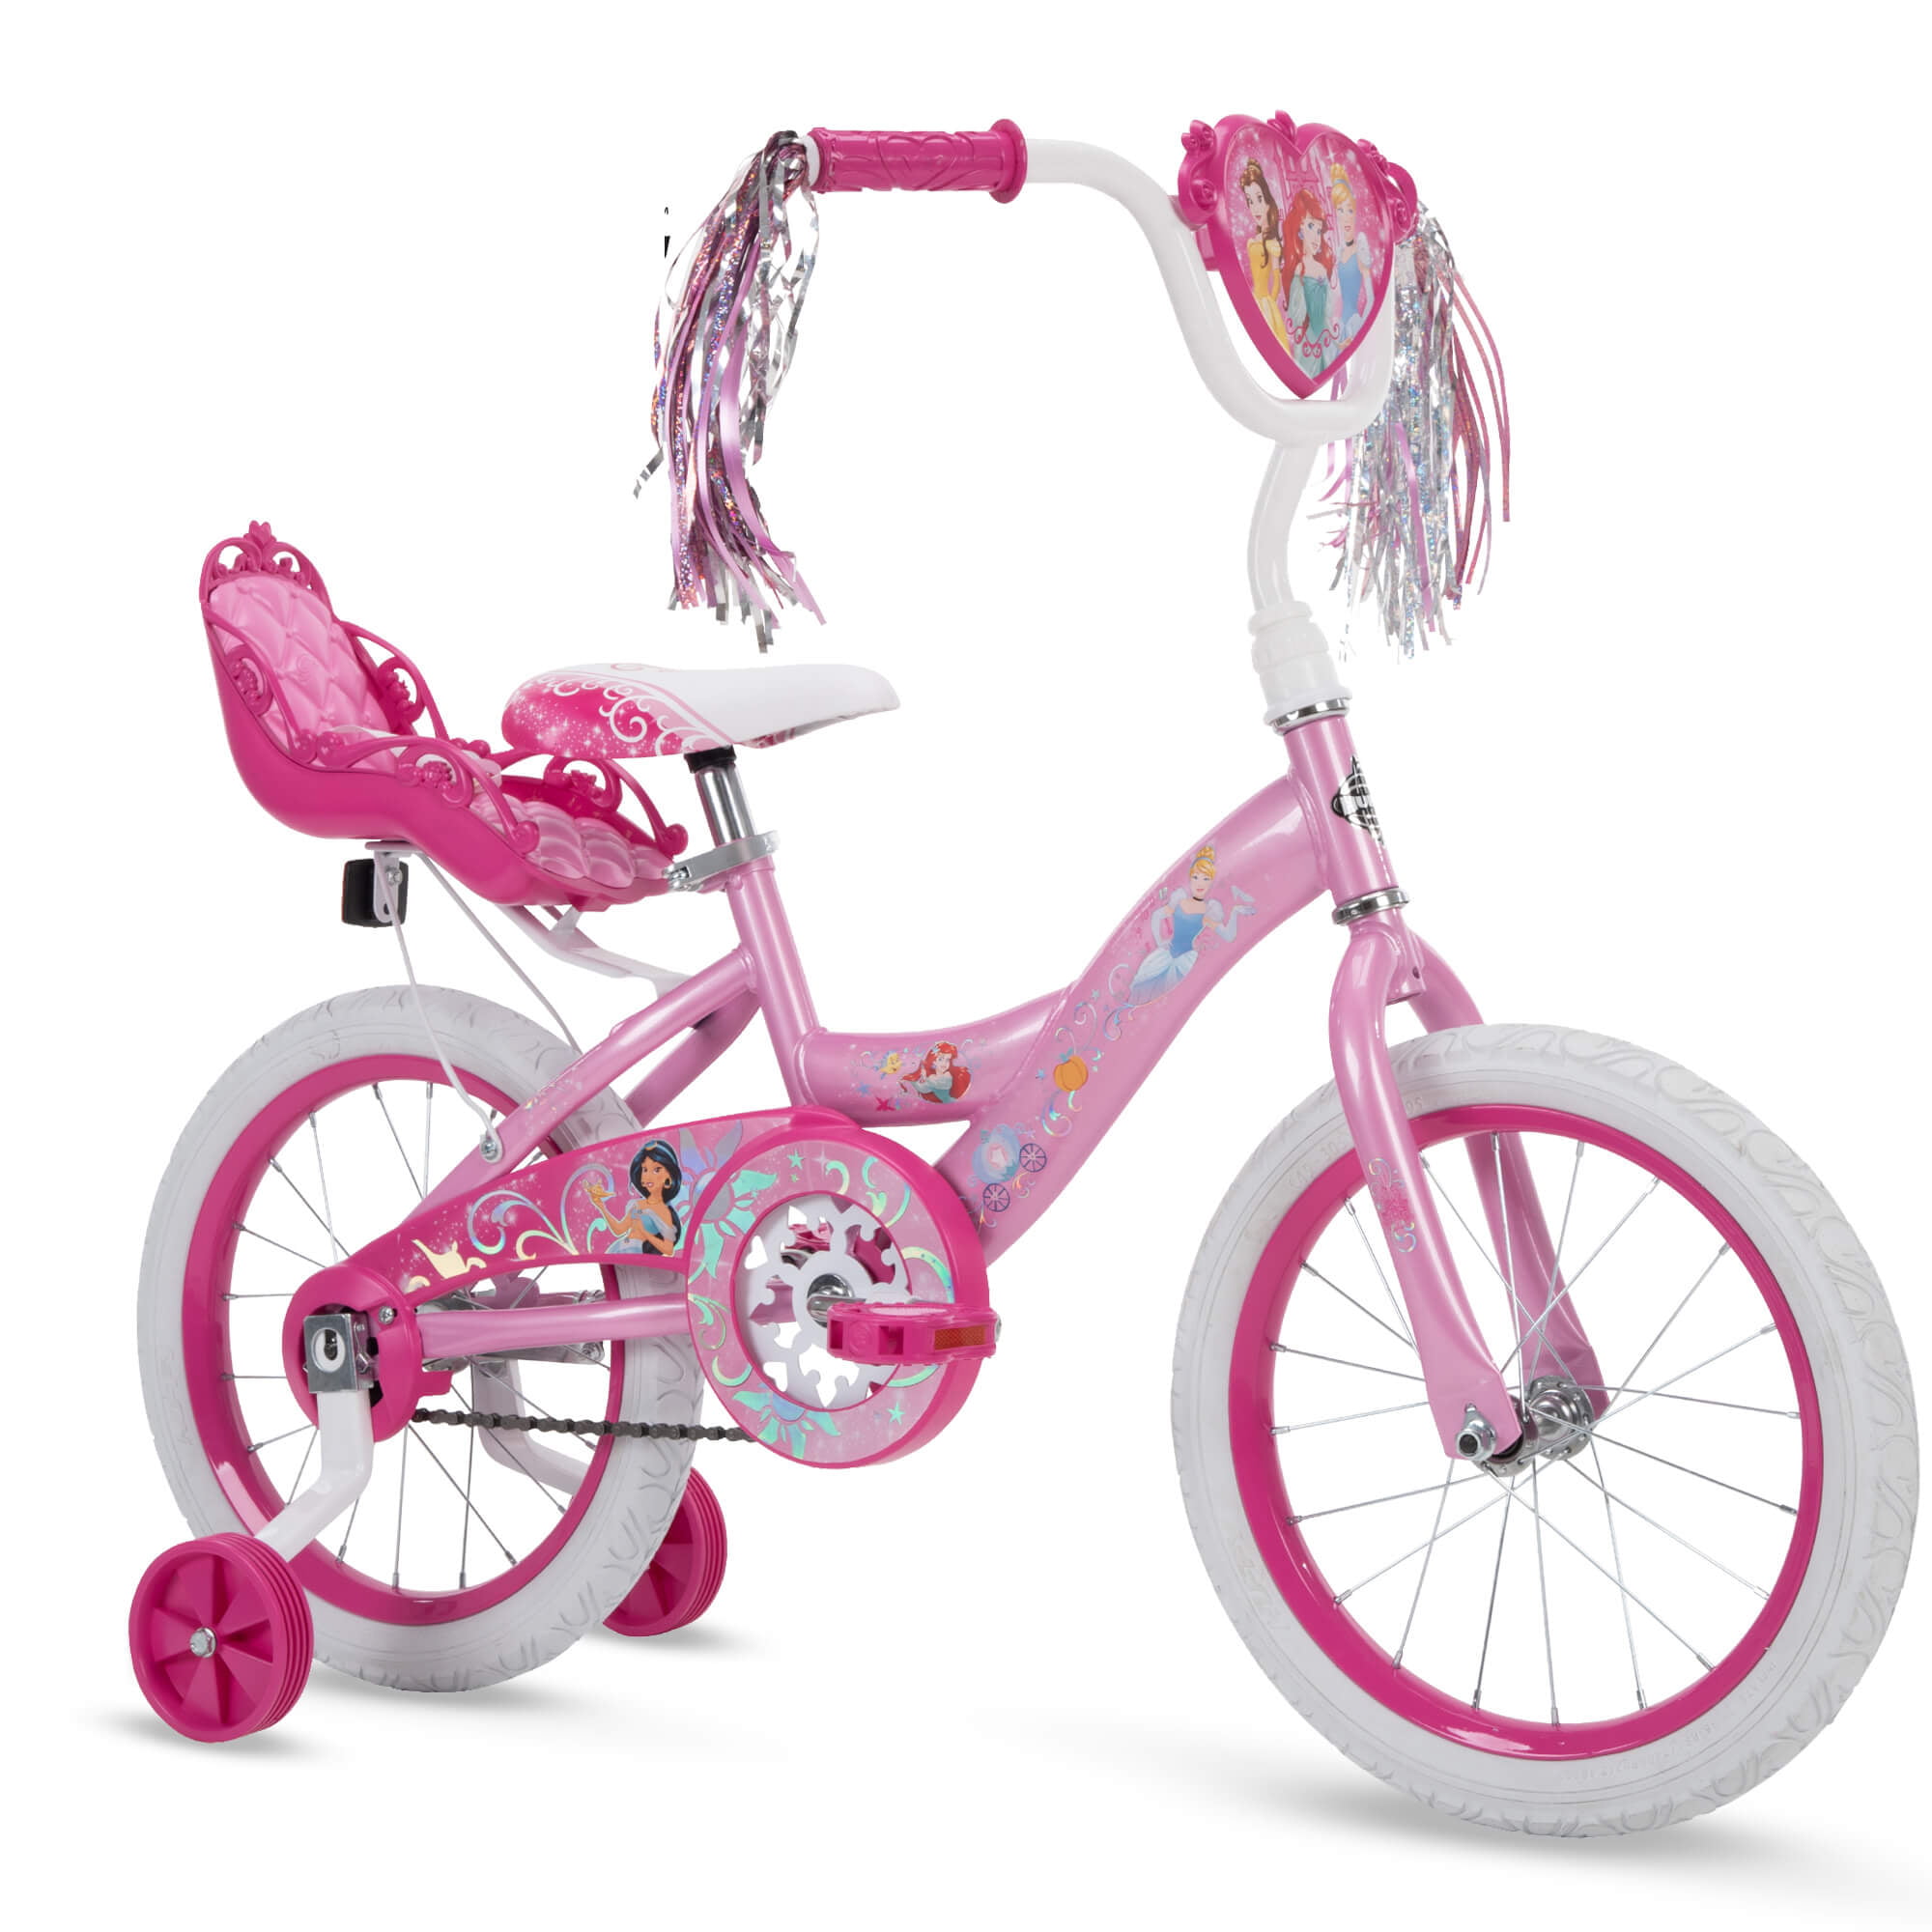 pink 16 inch bicycle with a pink doll carriage, training wheels, and Disney princess embellishments